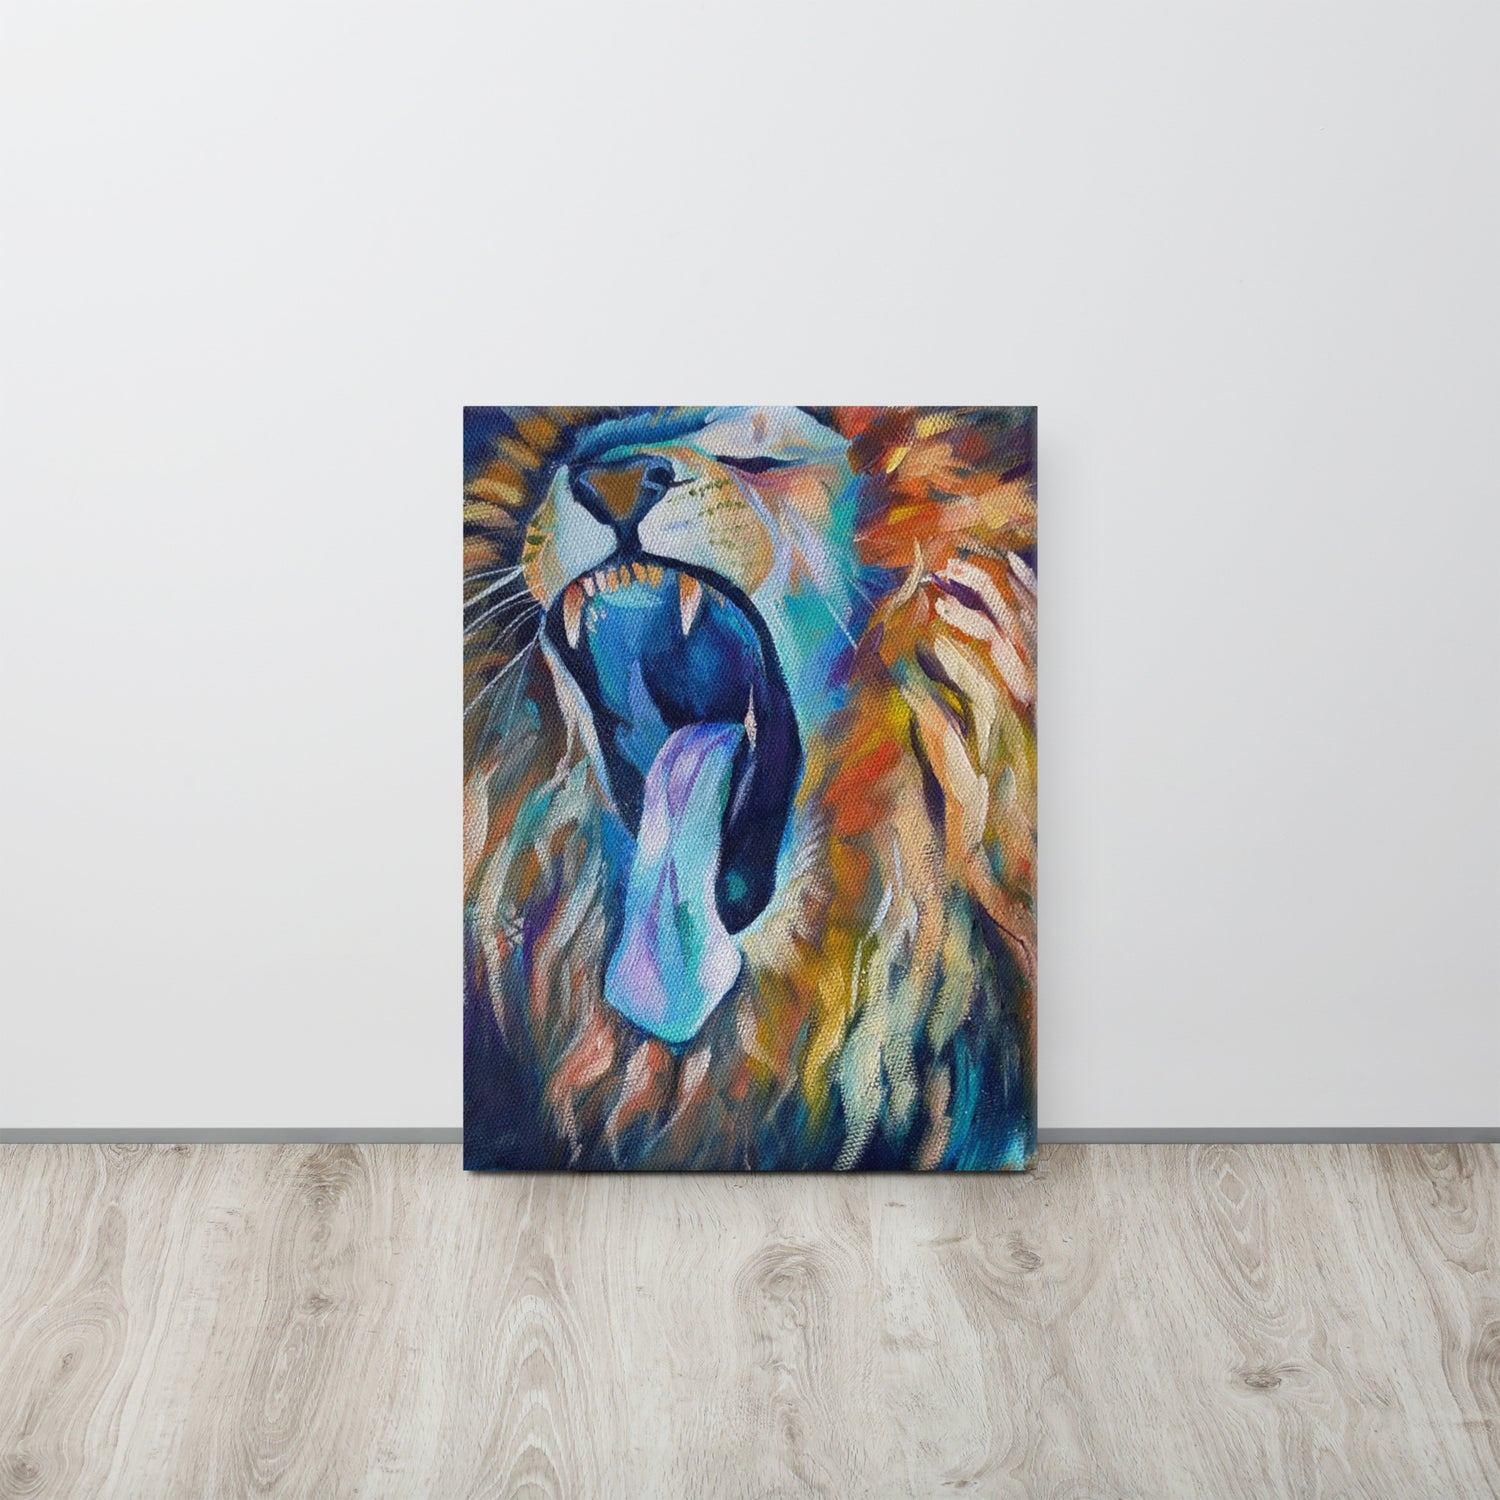 CANVAS PRINT :- “ I am the fire “